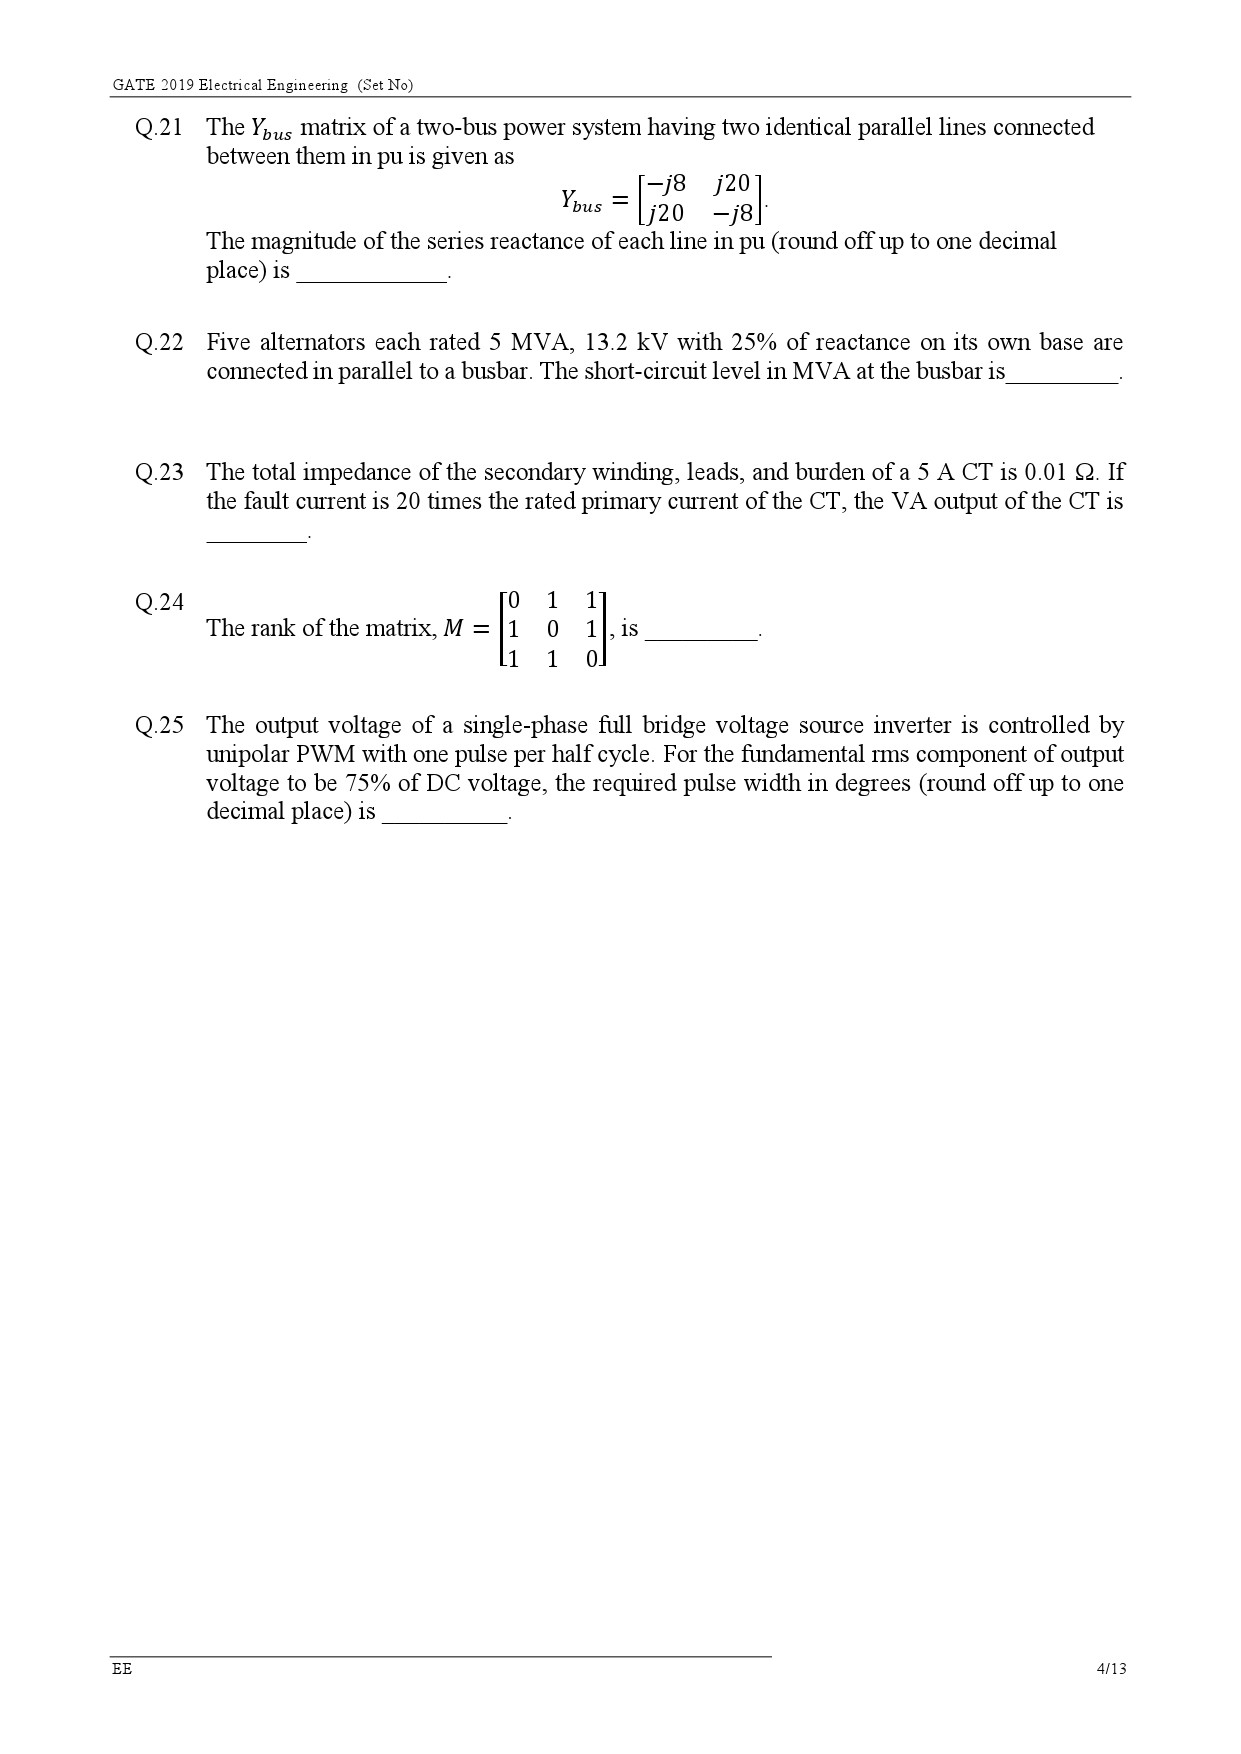 GATE Exam Question Paper 2019 Electrical Engineering 6